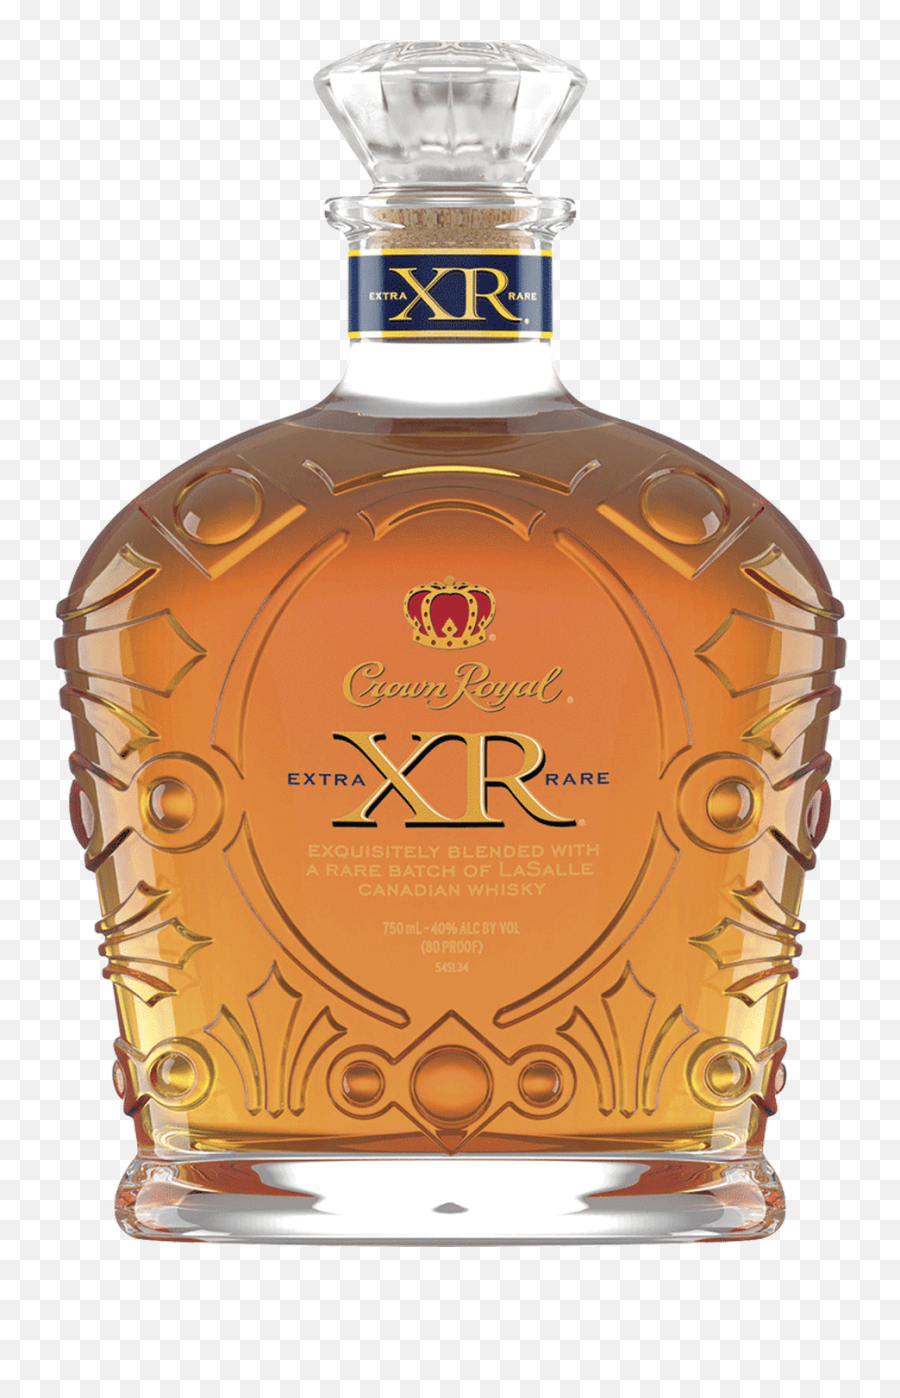 Crown Royal Xr - Crown Royal Xr Emoji,Crown Royal Png